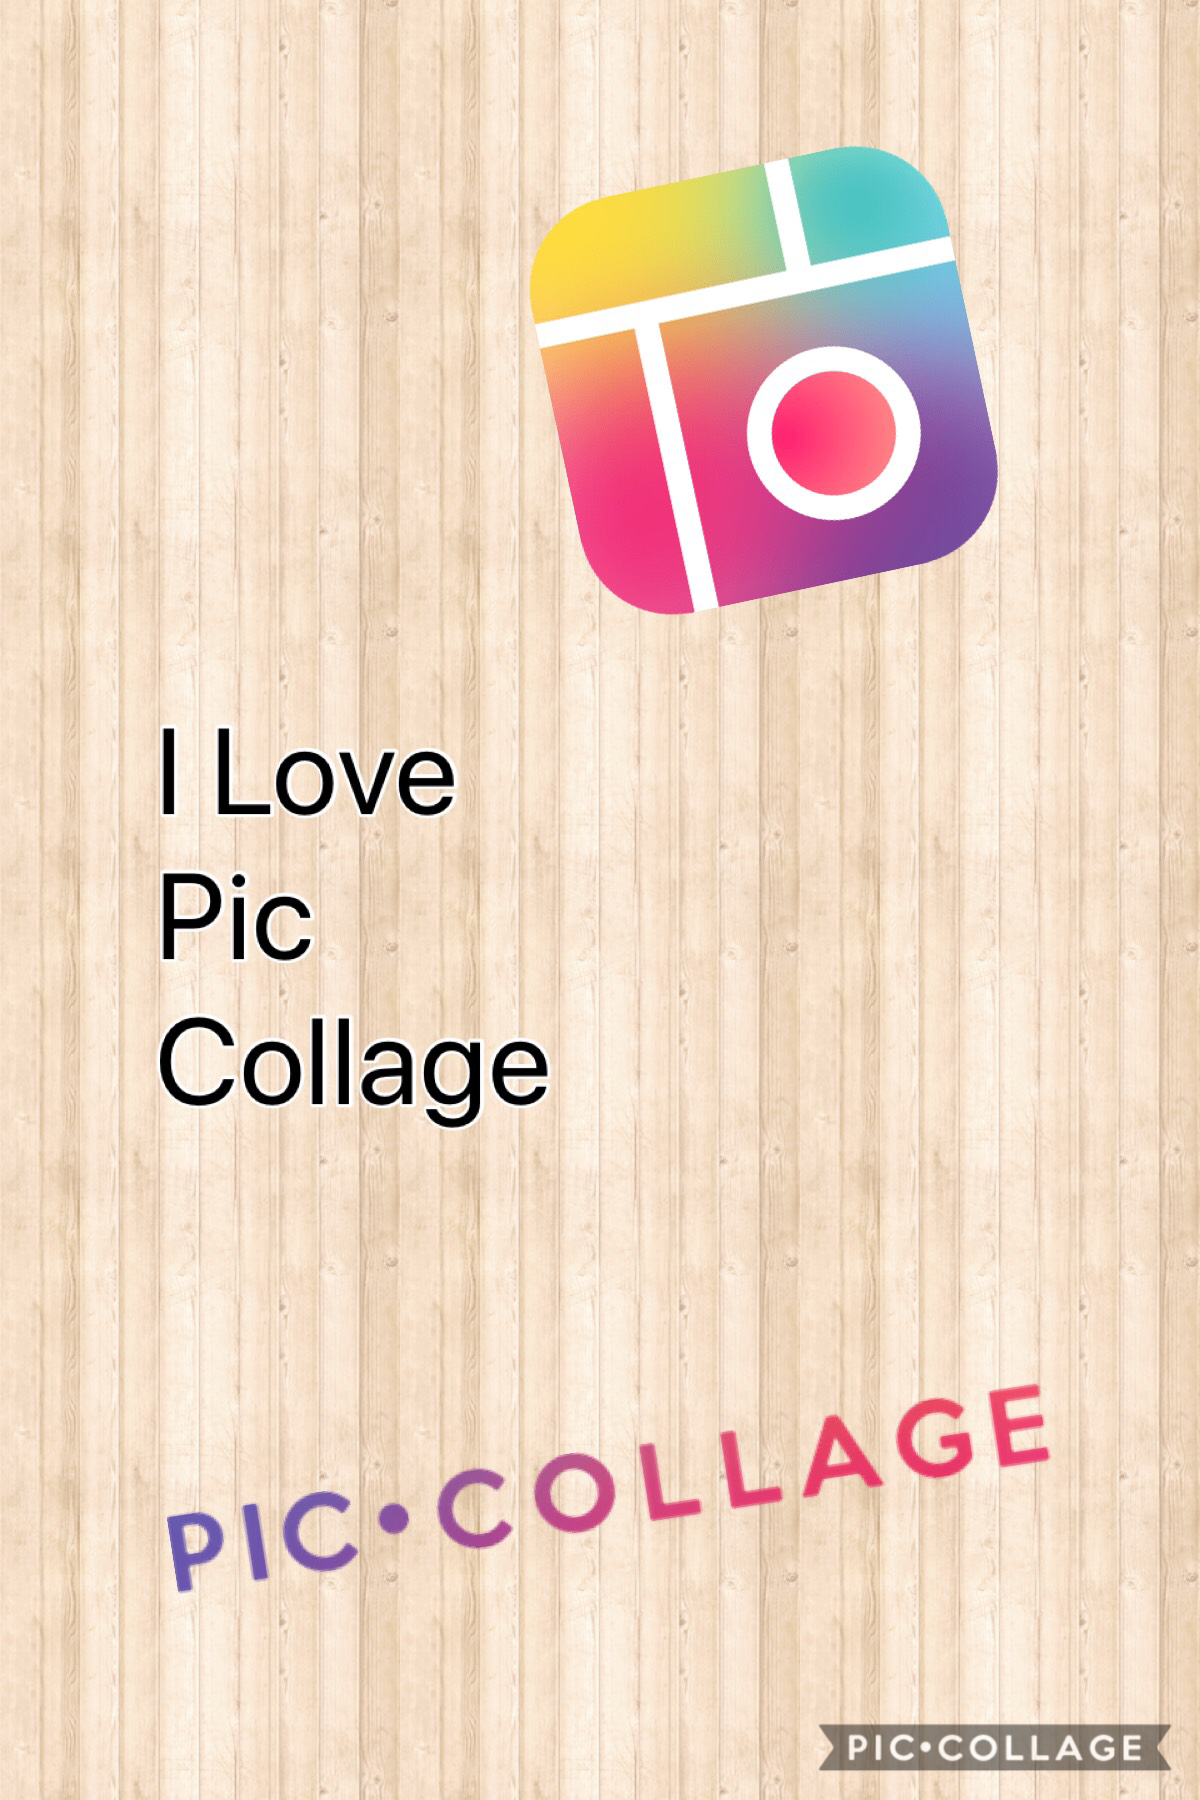 Who does not like pic collage